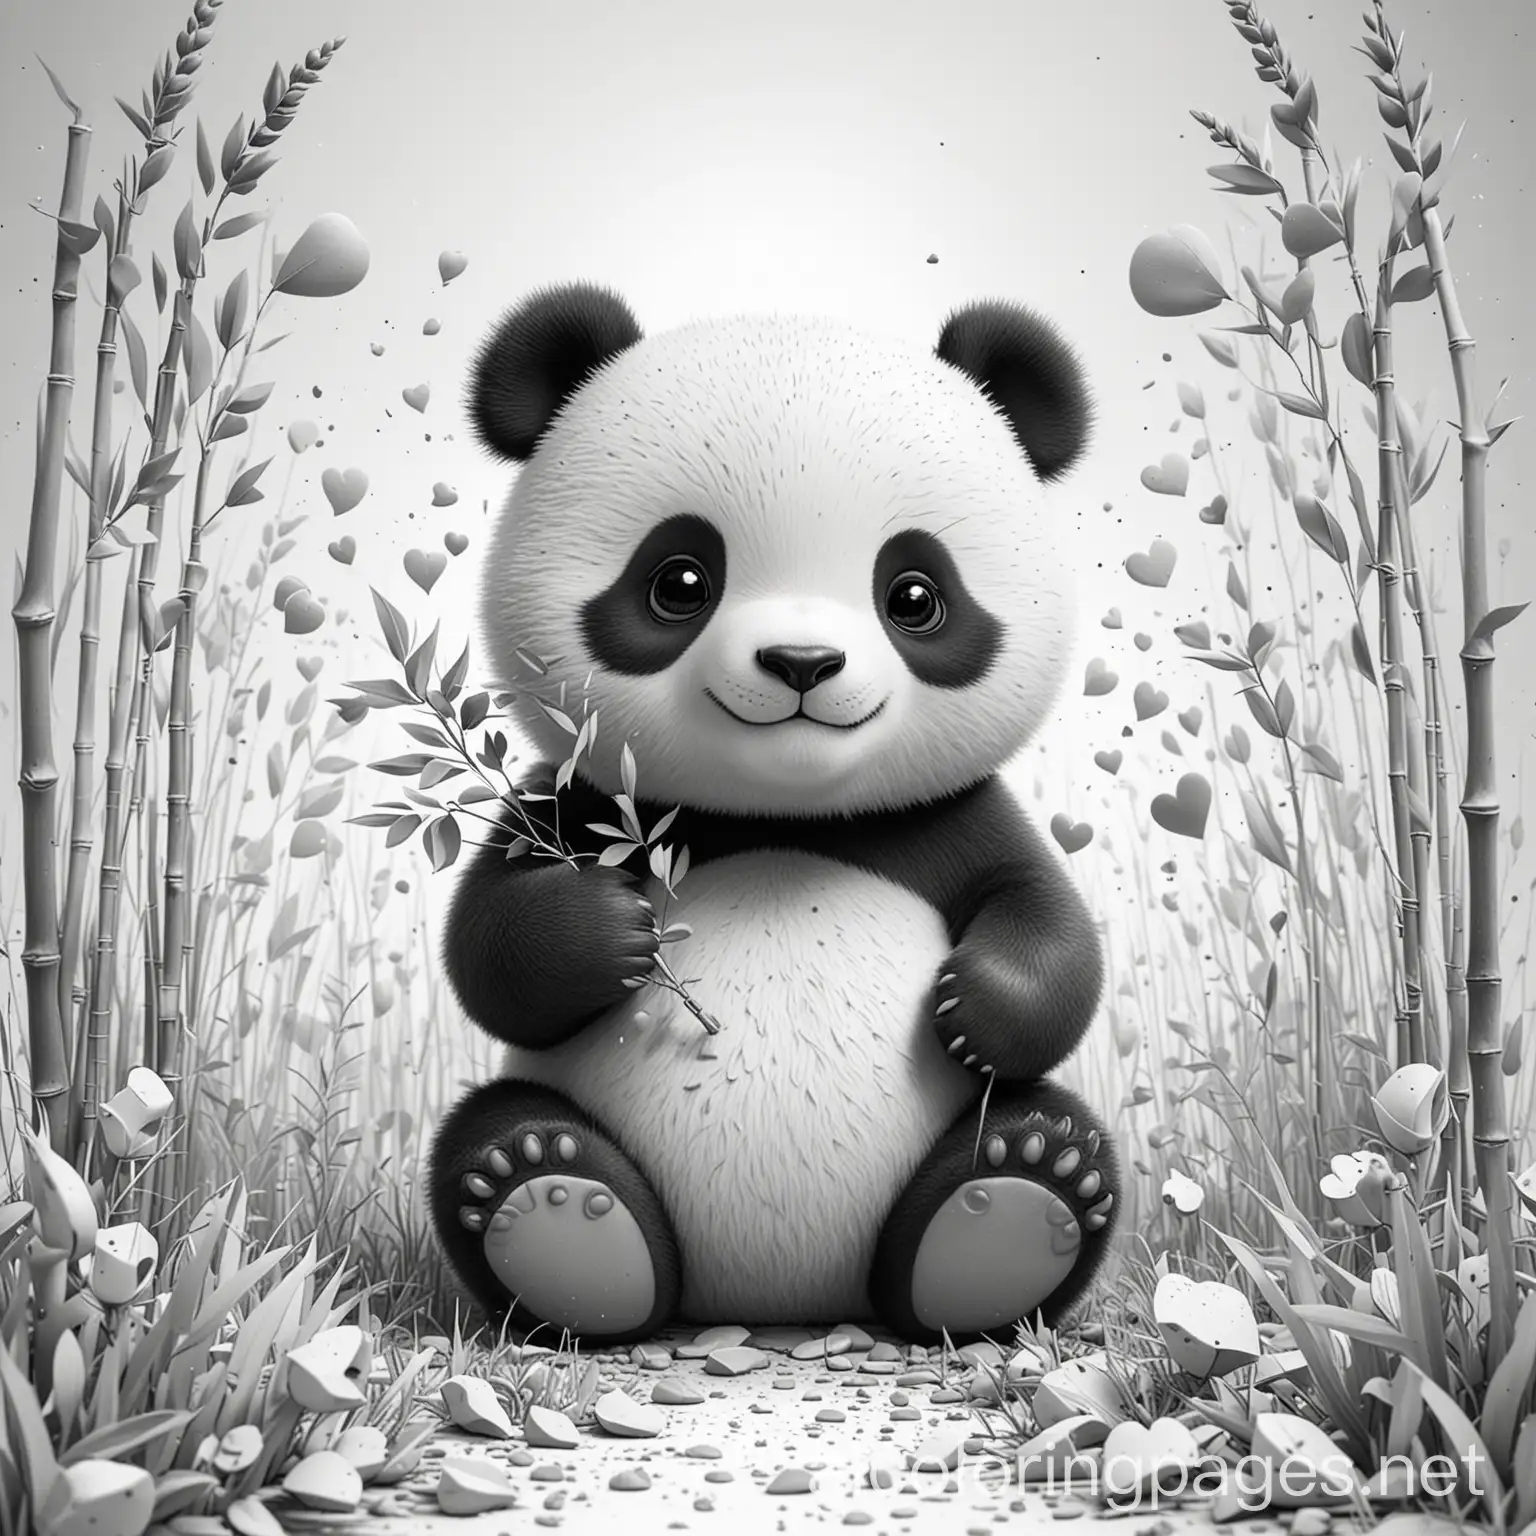 An enchanting artwork of a kawaii panda holding a bamboo shoot amidst a field of scattered hearts, Coloring Page, black and white, line art, white background, Simplicity, Ample White Space